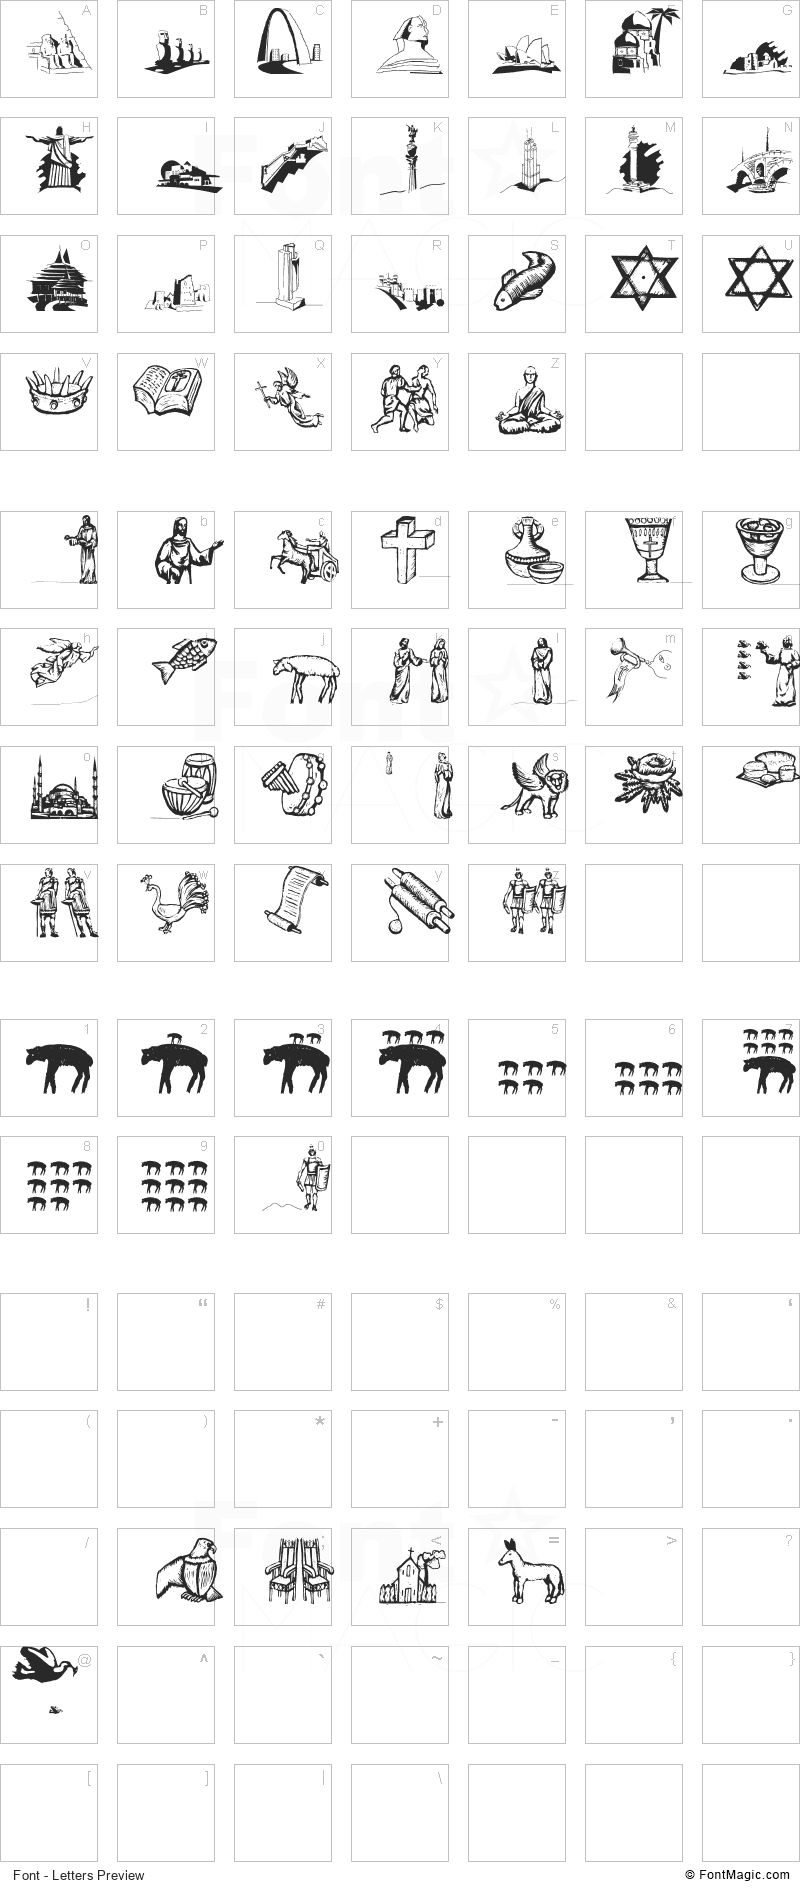 DenkMal Font - All Latters Preview Chart